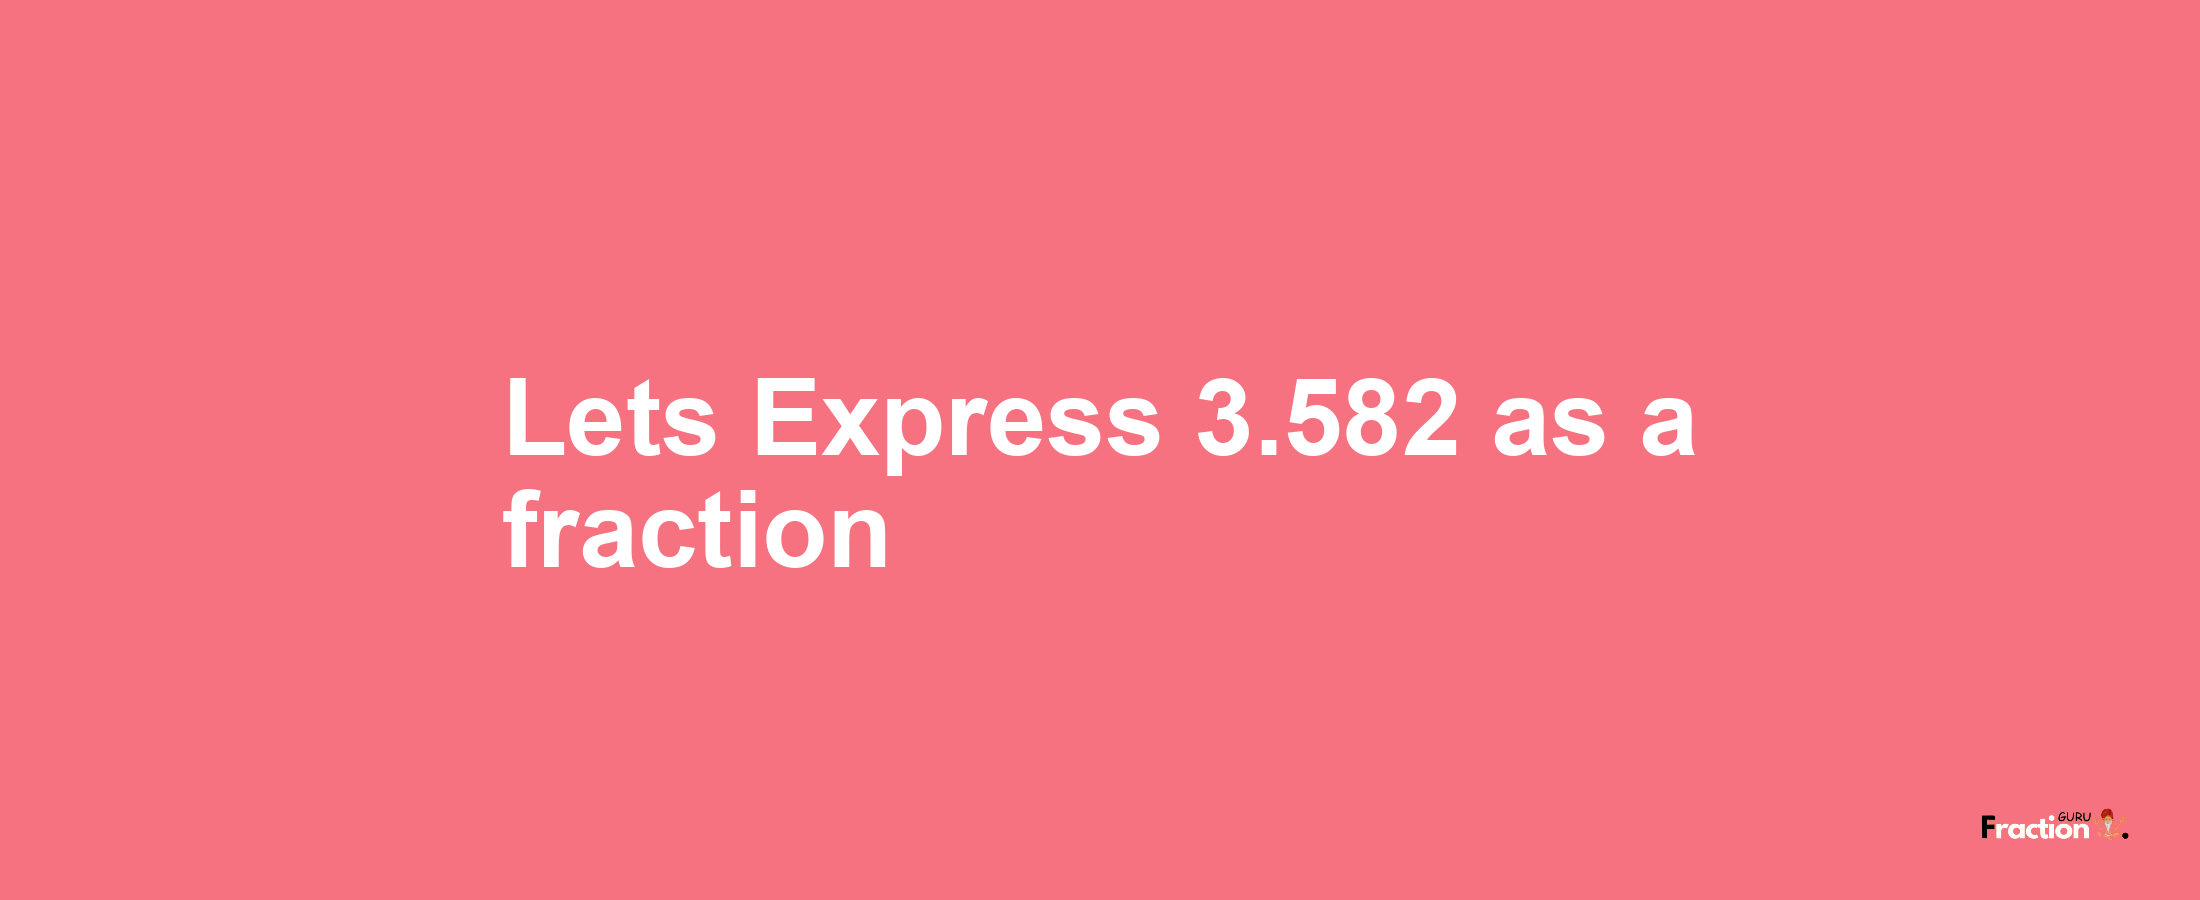 Lets Express 3.582 as afraction